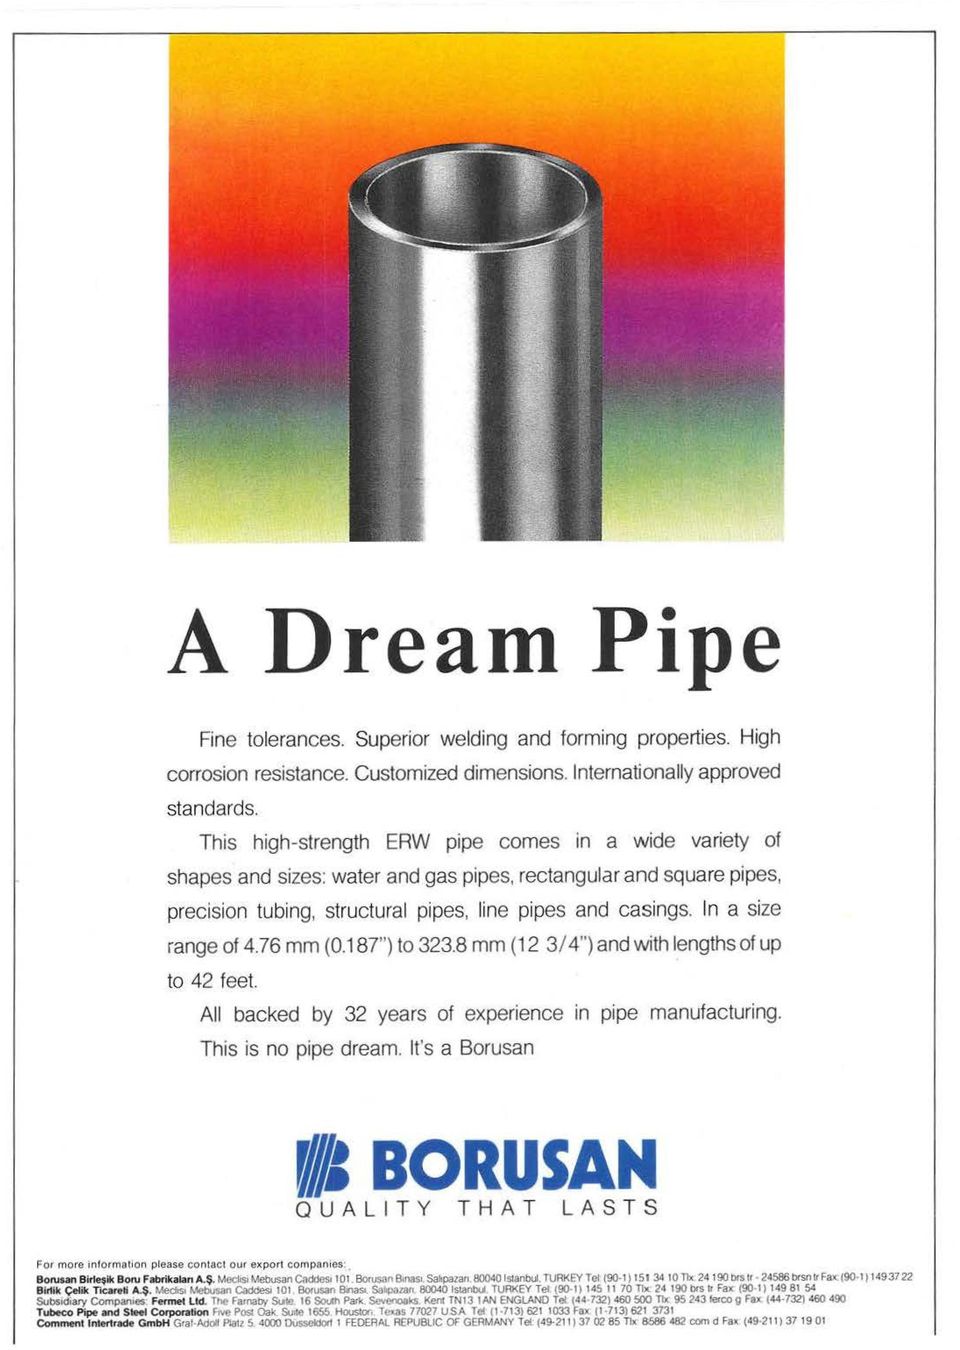 In a size range of 4.76 mm (0.187") to 323.8 mm (12 3/ 4") and with lengths of up to 42 feet. All backed by 32 years of experience in pipe manufacturing. This is no pipe dream.